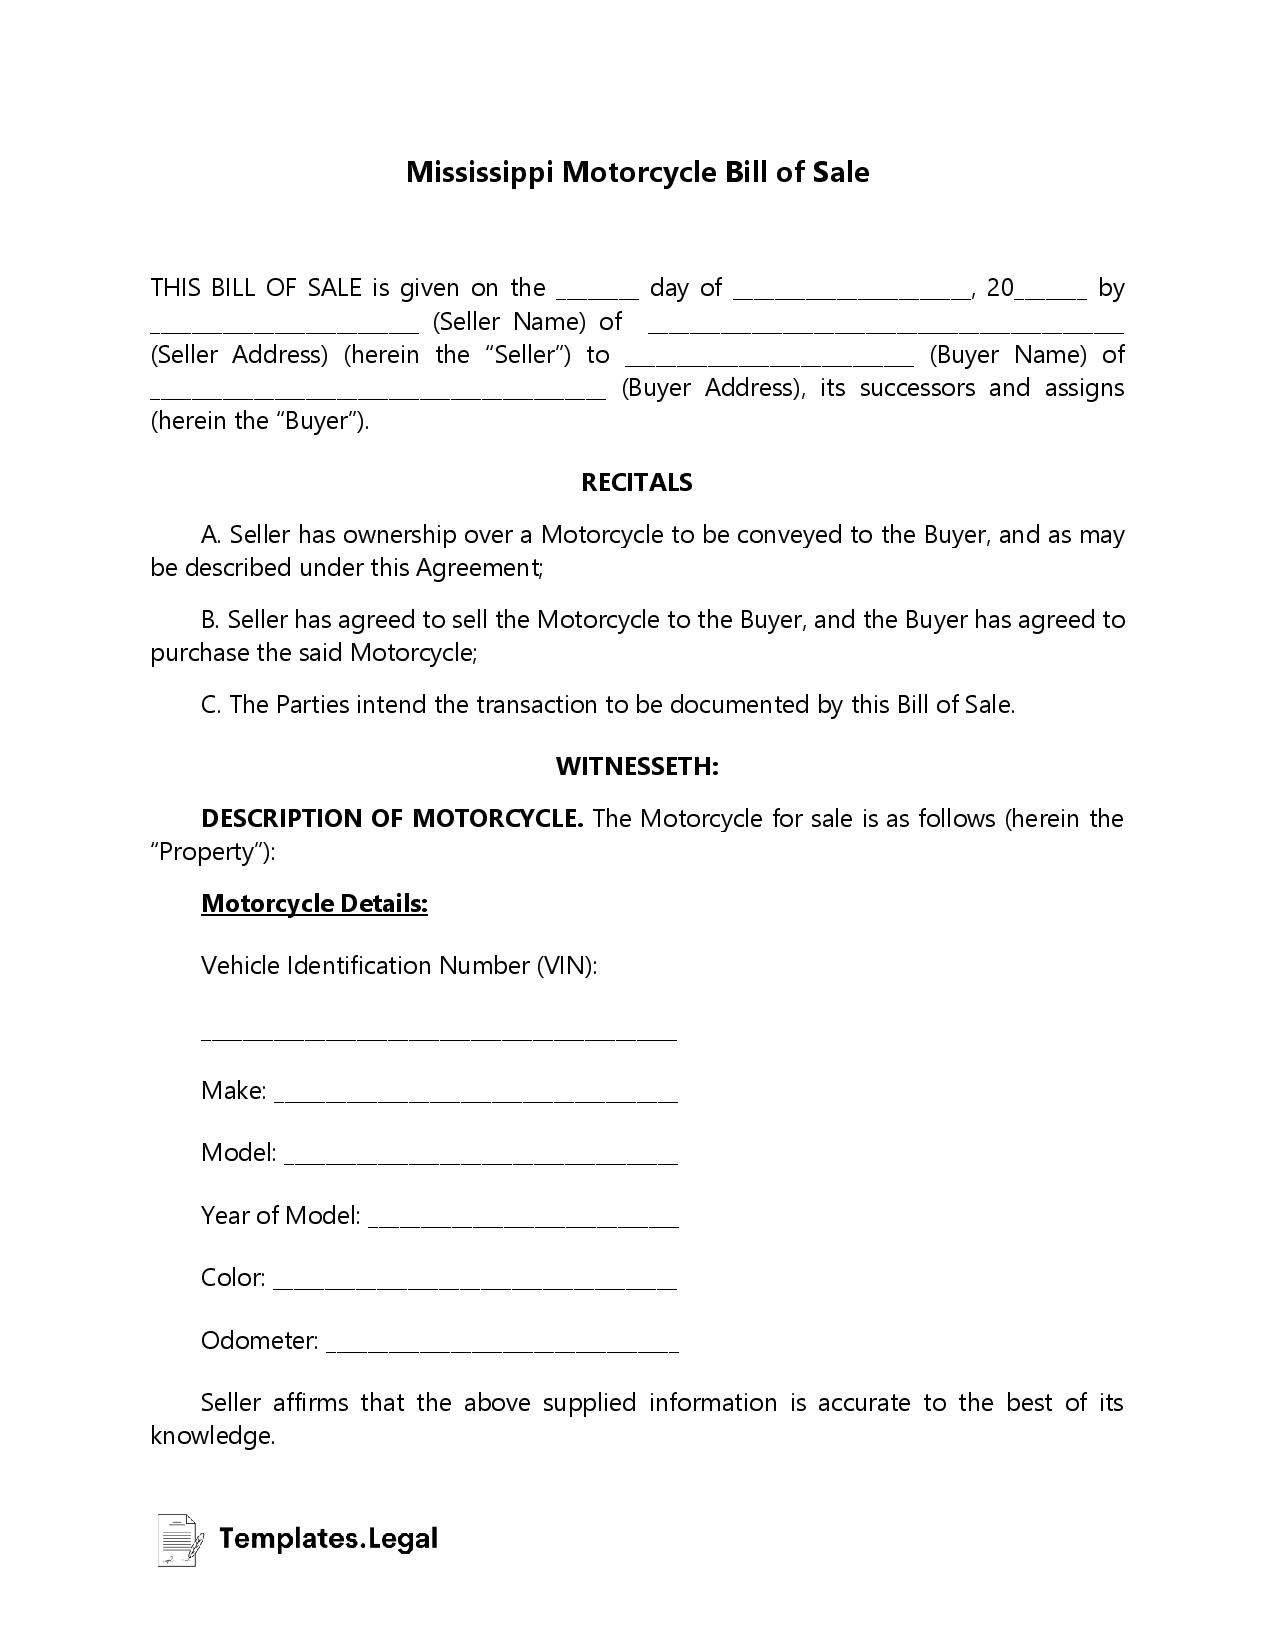 Mississippi Motorcycle Bill of Sale - Templates.Legal